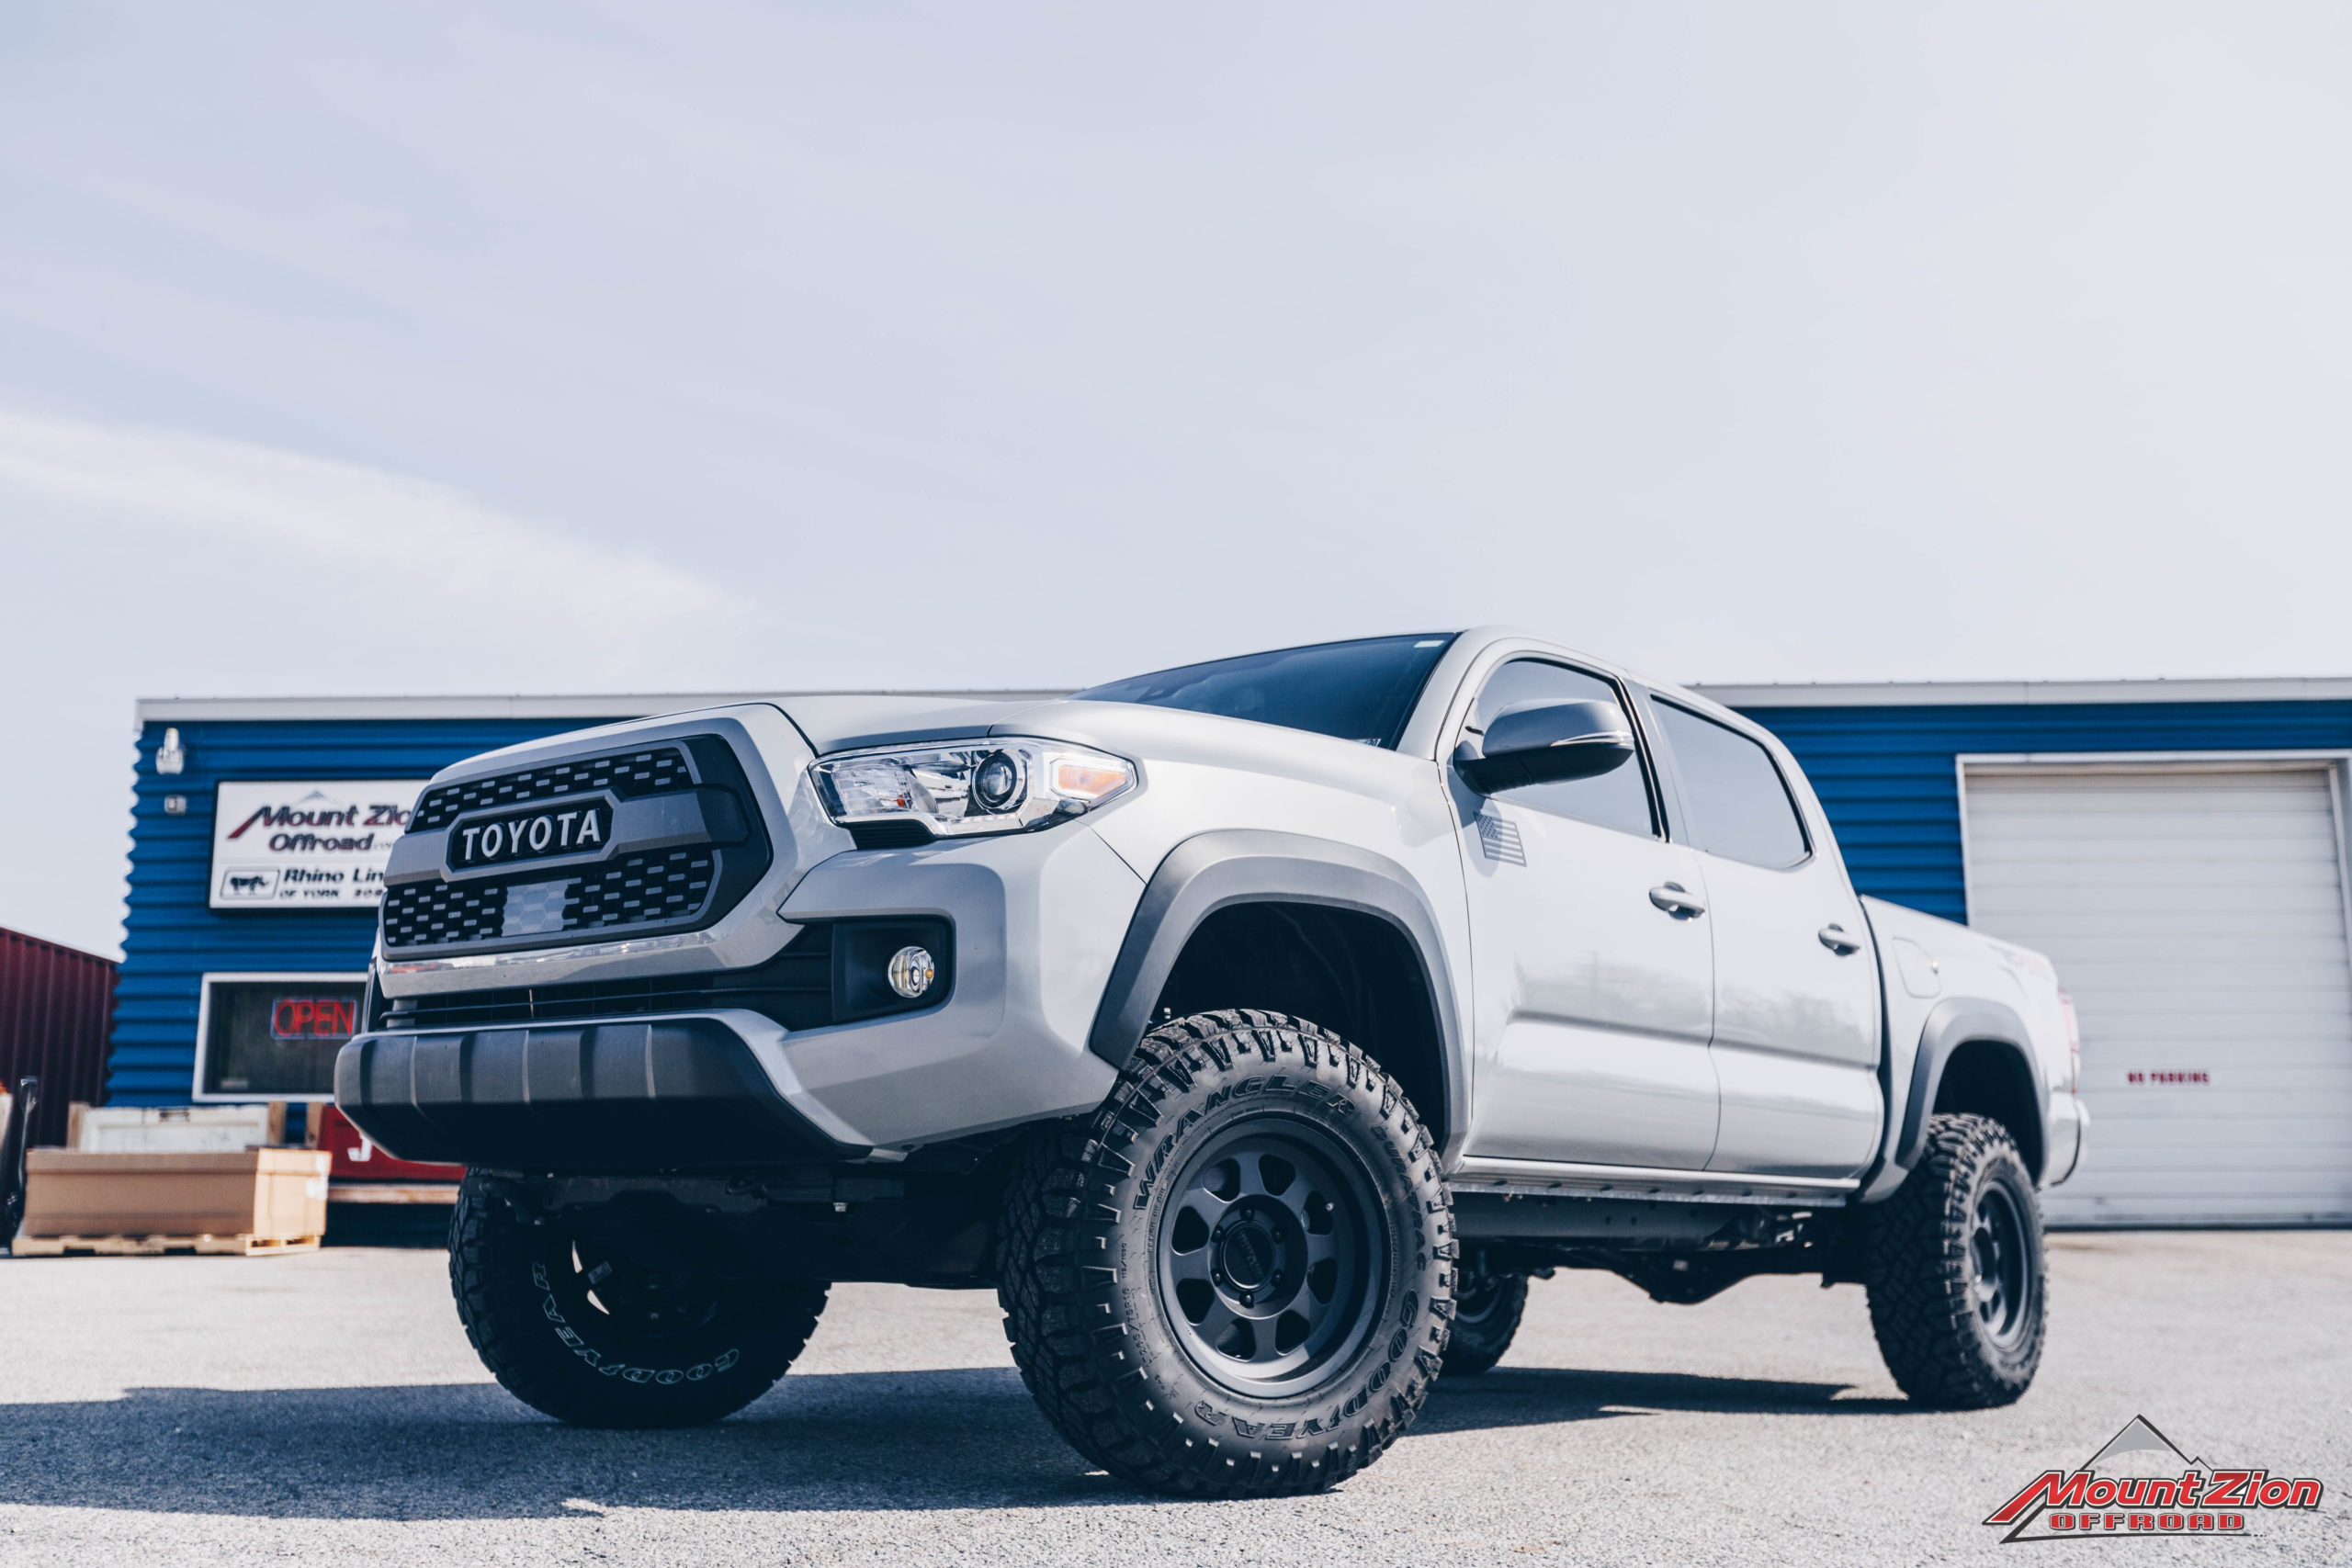 2019 Toyota Tacoma TRD Pro - Mount Zion Offroad